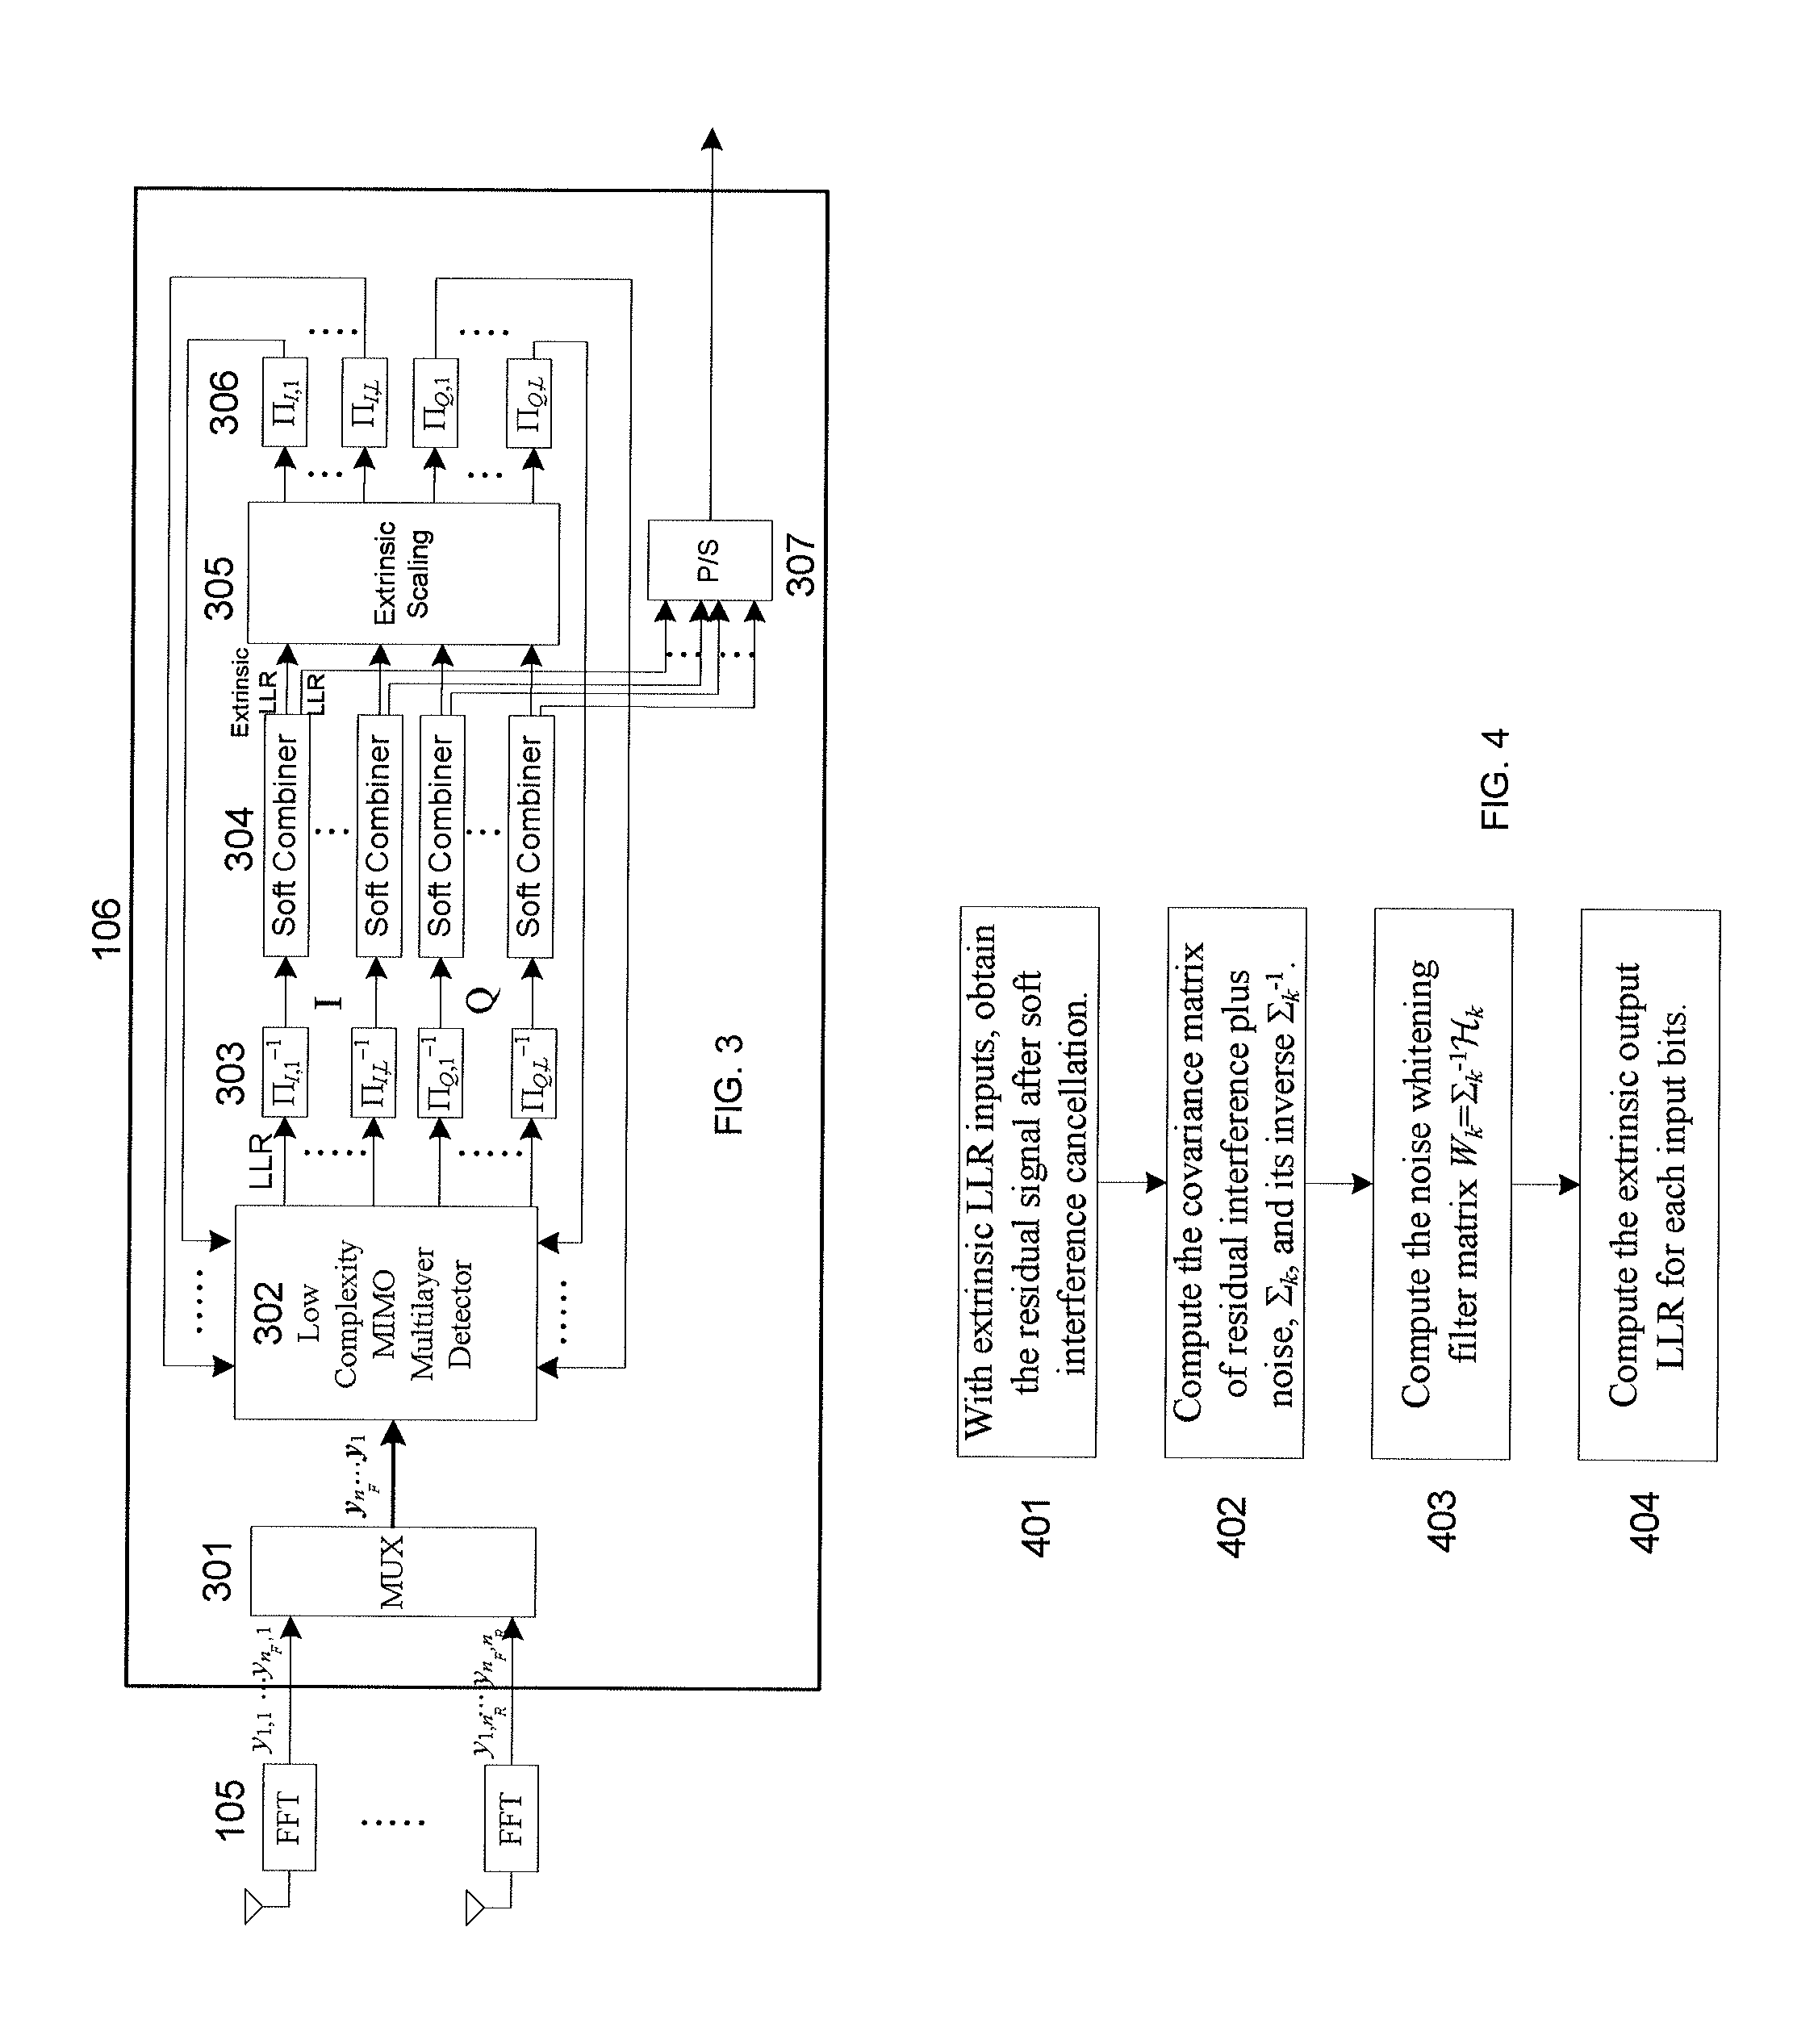 Apparatus and Method for Multilayer Space-Time-Frequency Precoding for a MIMO-OFDM Wireless Transmission System